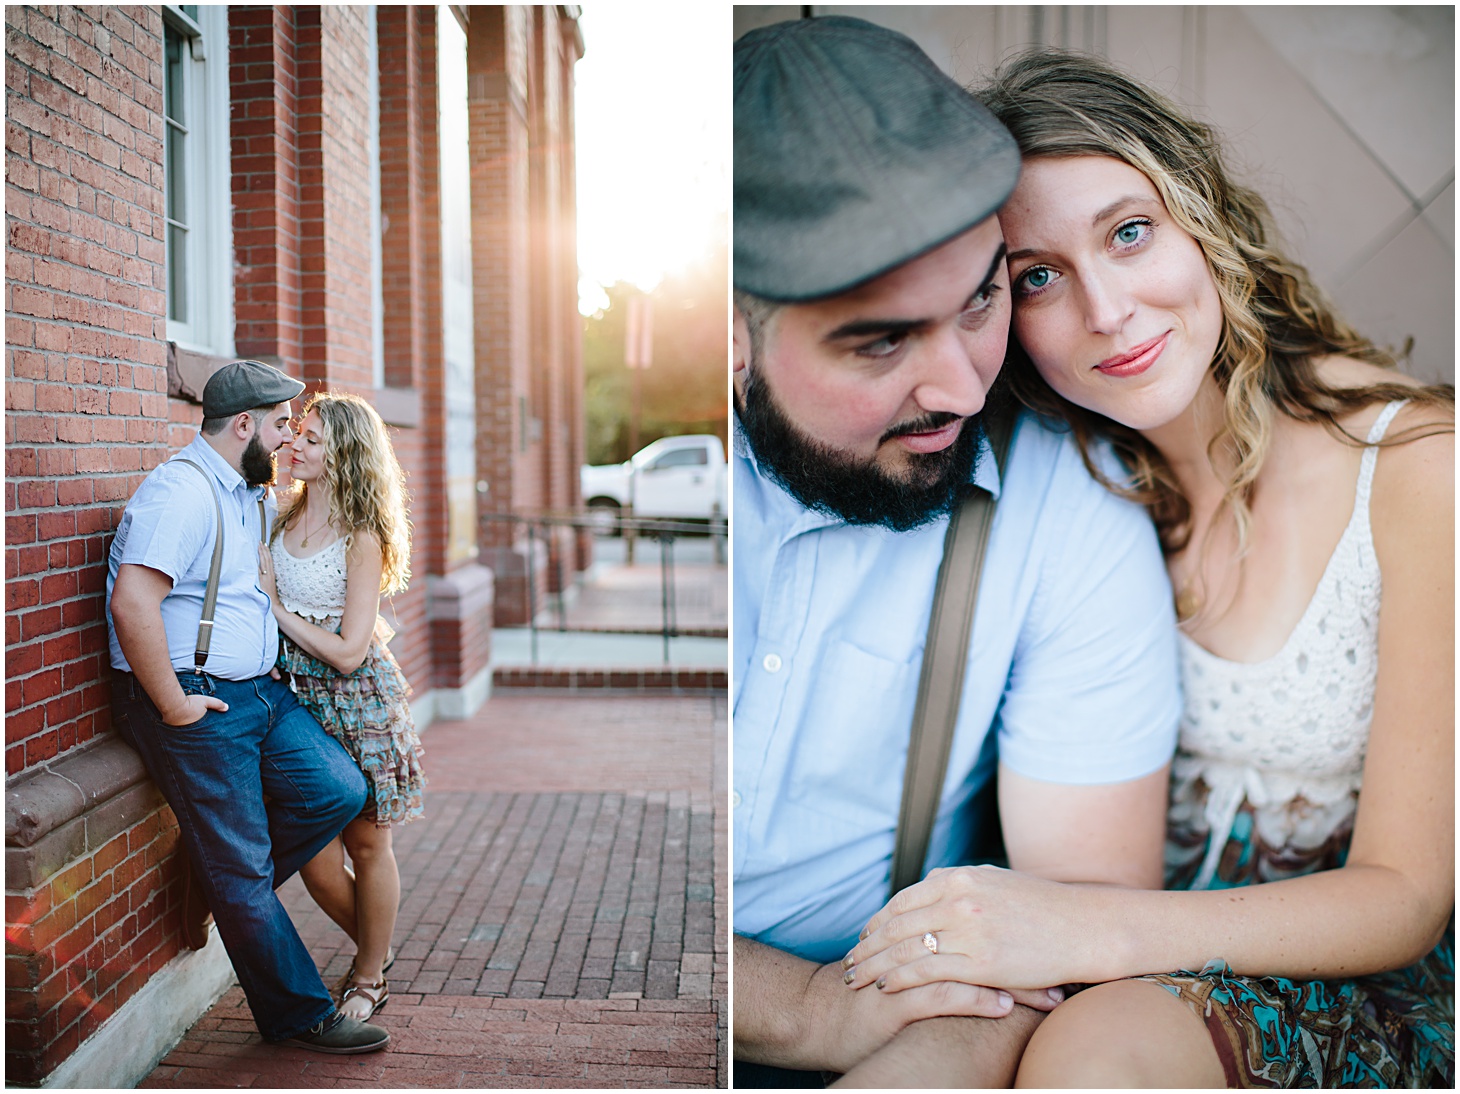 Creative DC Engagement Session Locations by Sarah Bradshaw Photography